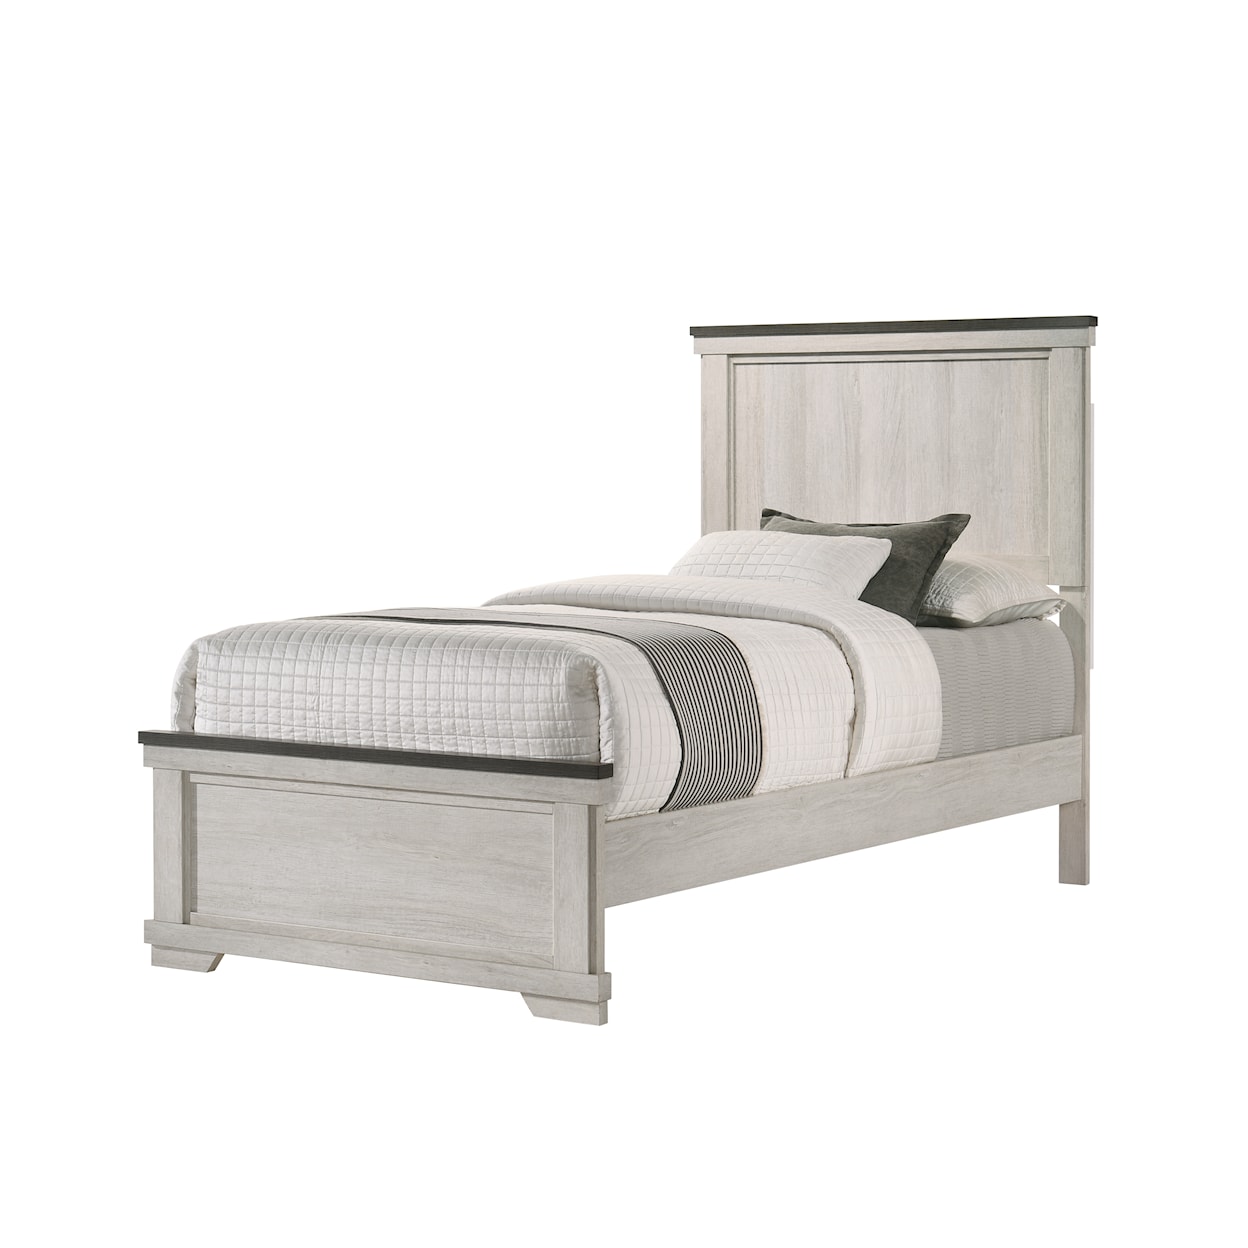 CM Leighton Twin Bed